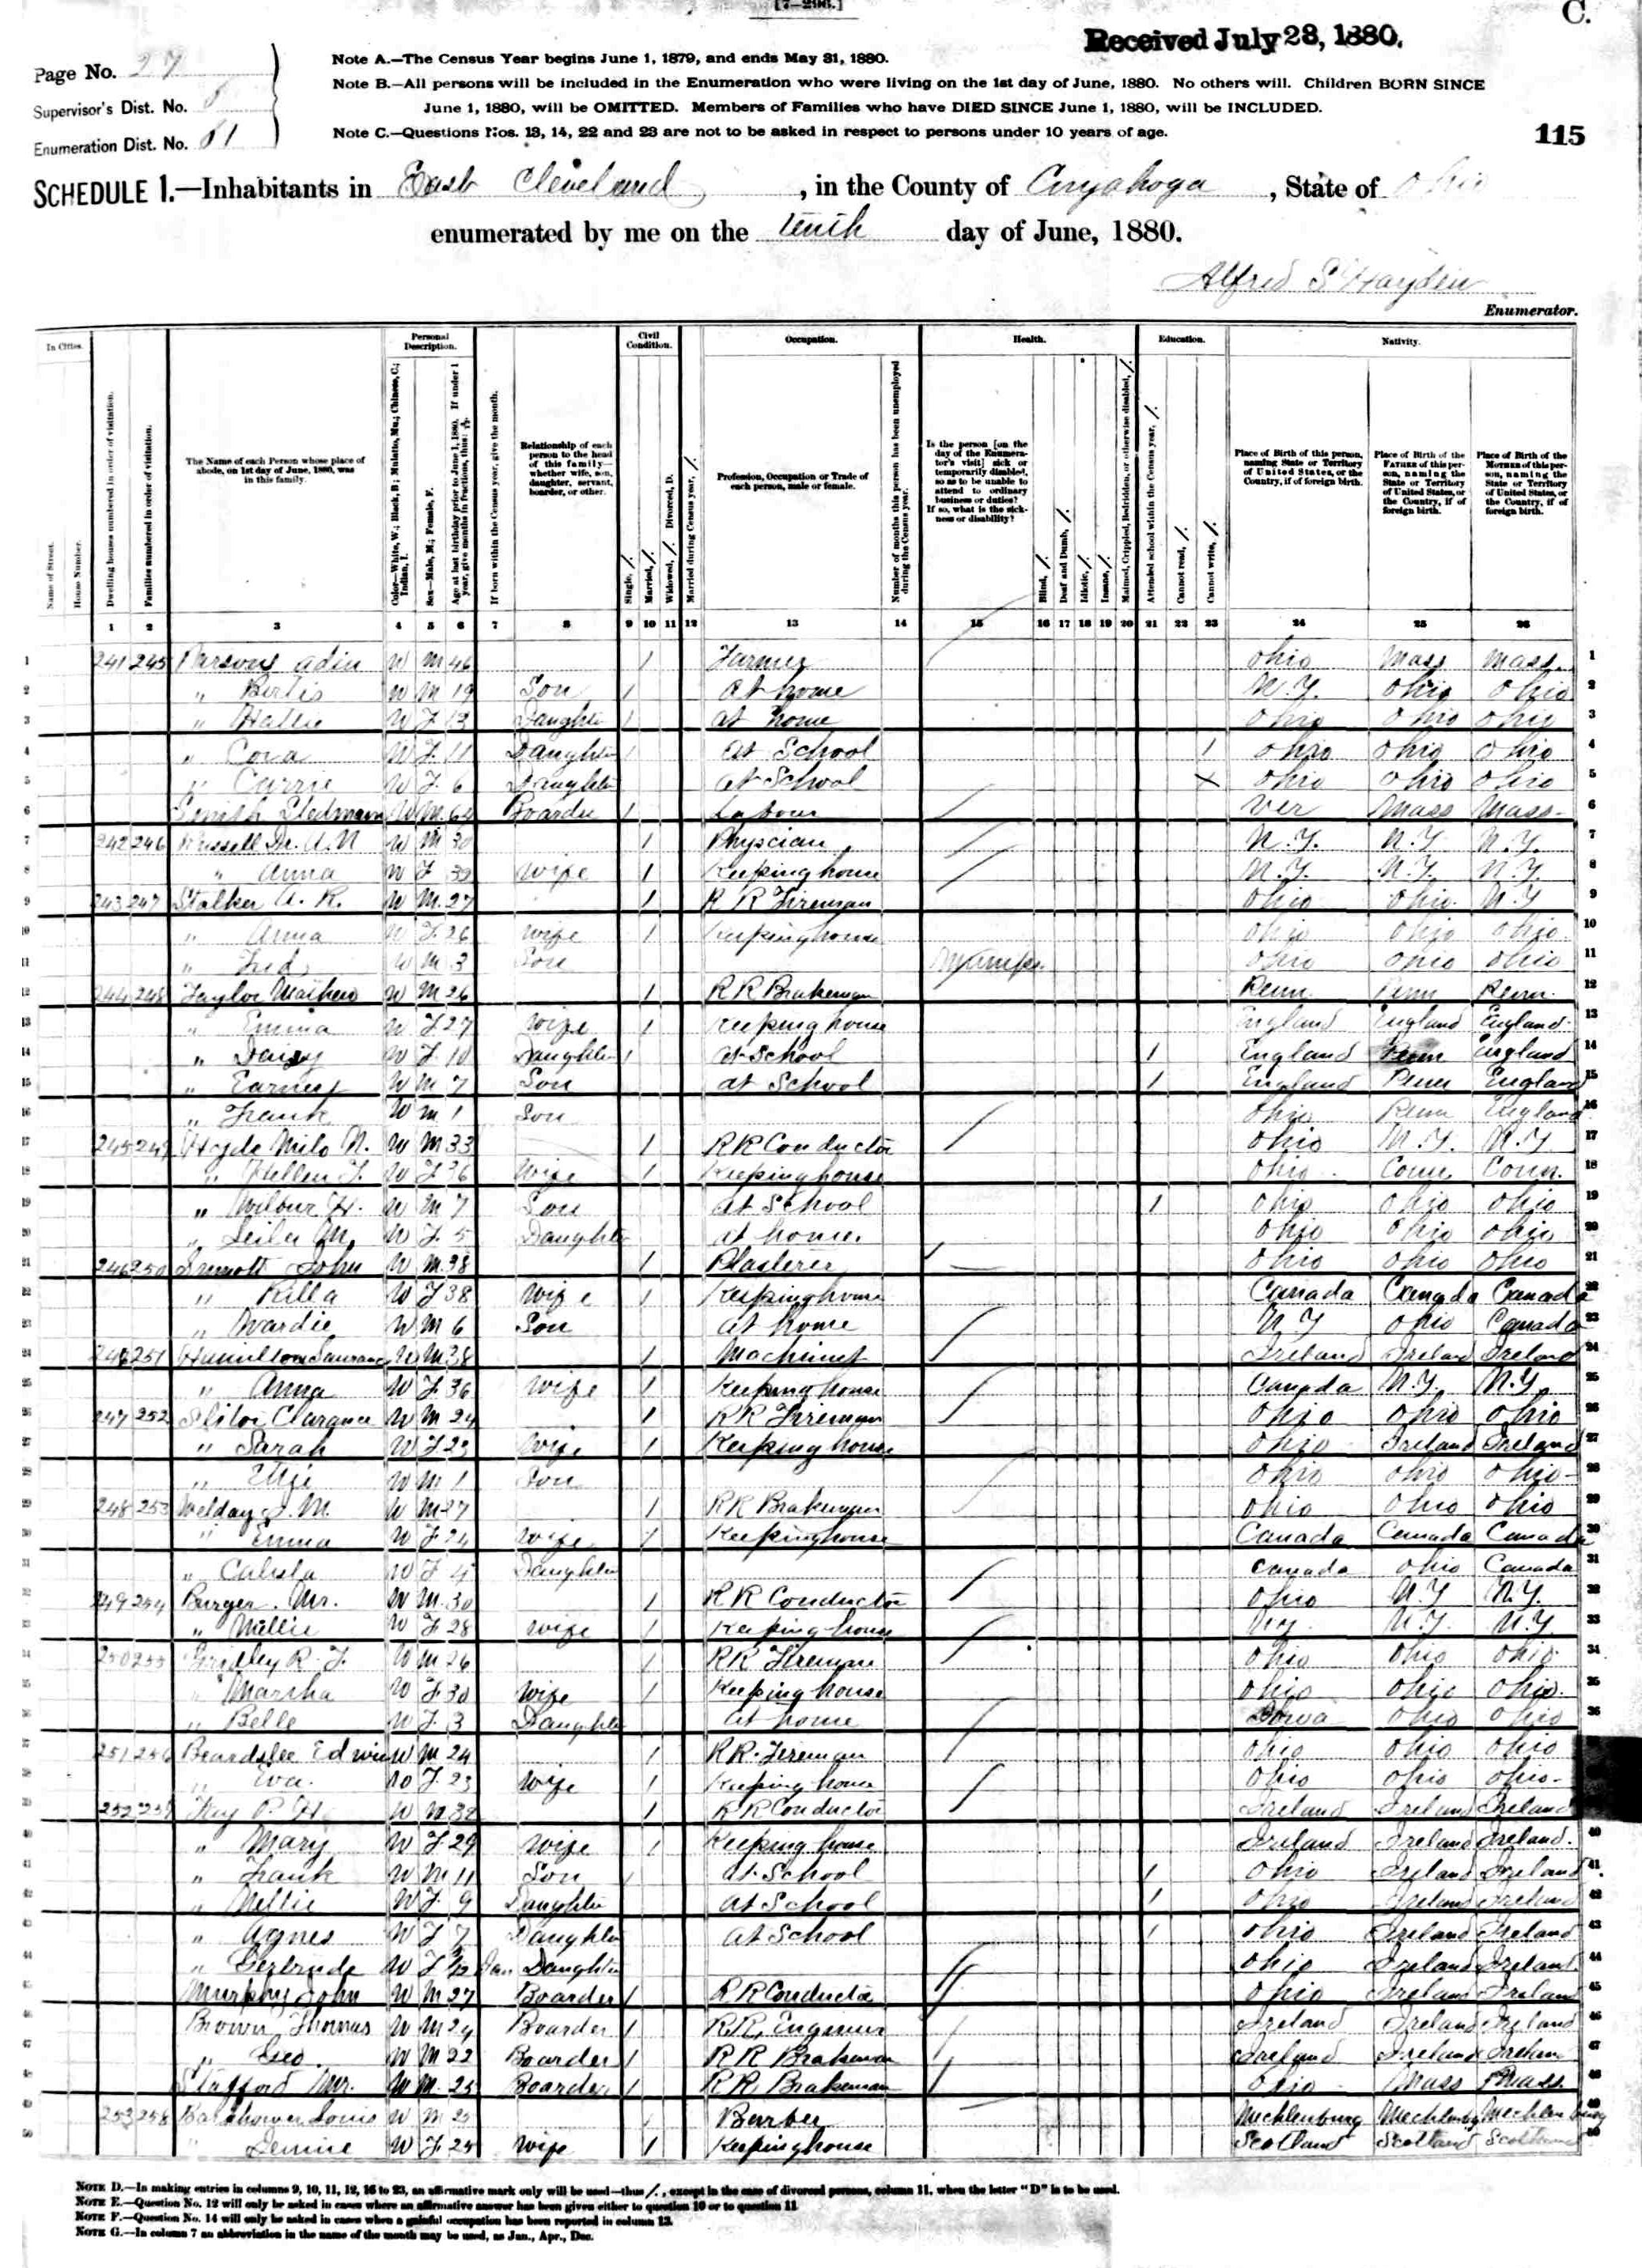 1880 Federal Census, District 61, East Cleveland, Cuyahoga County, Ohio - Patrick Fay